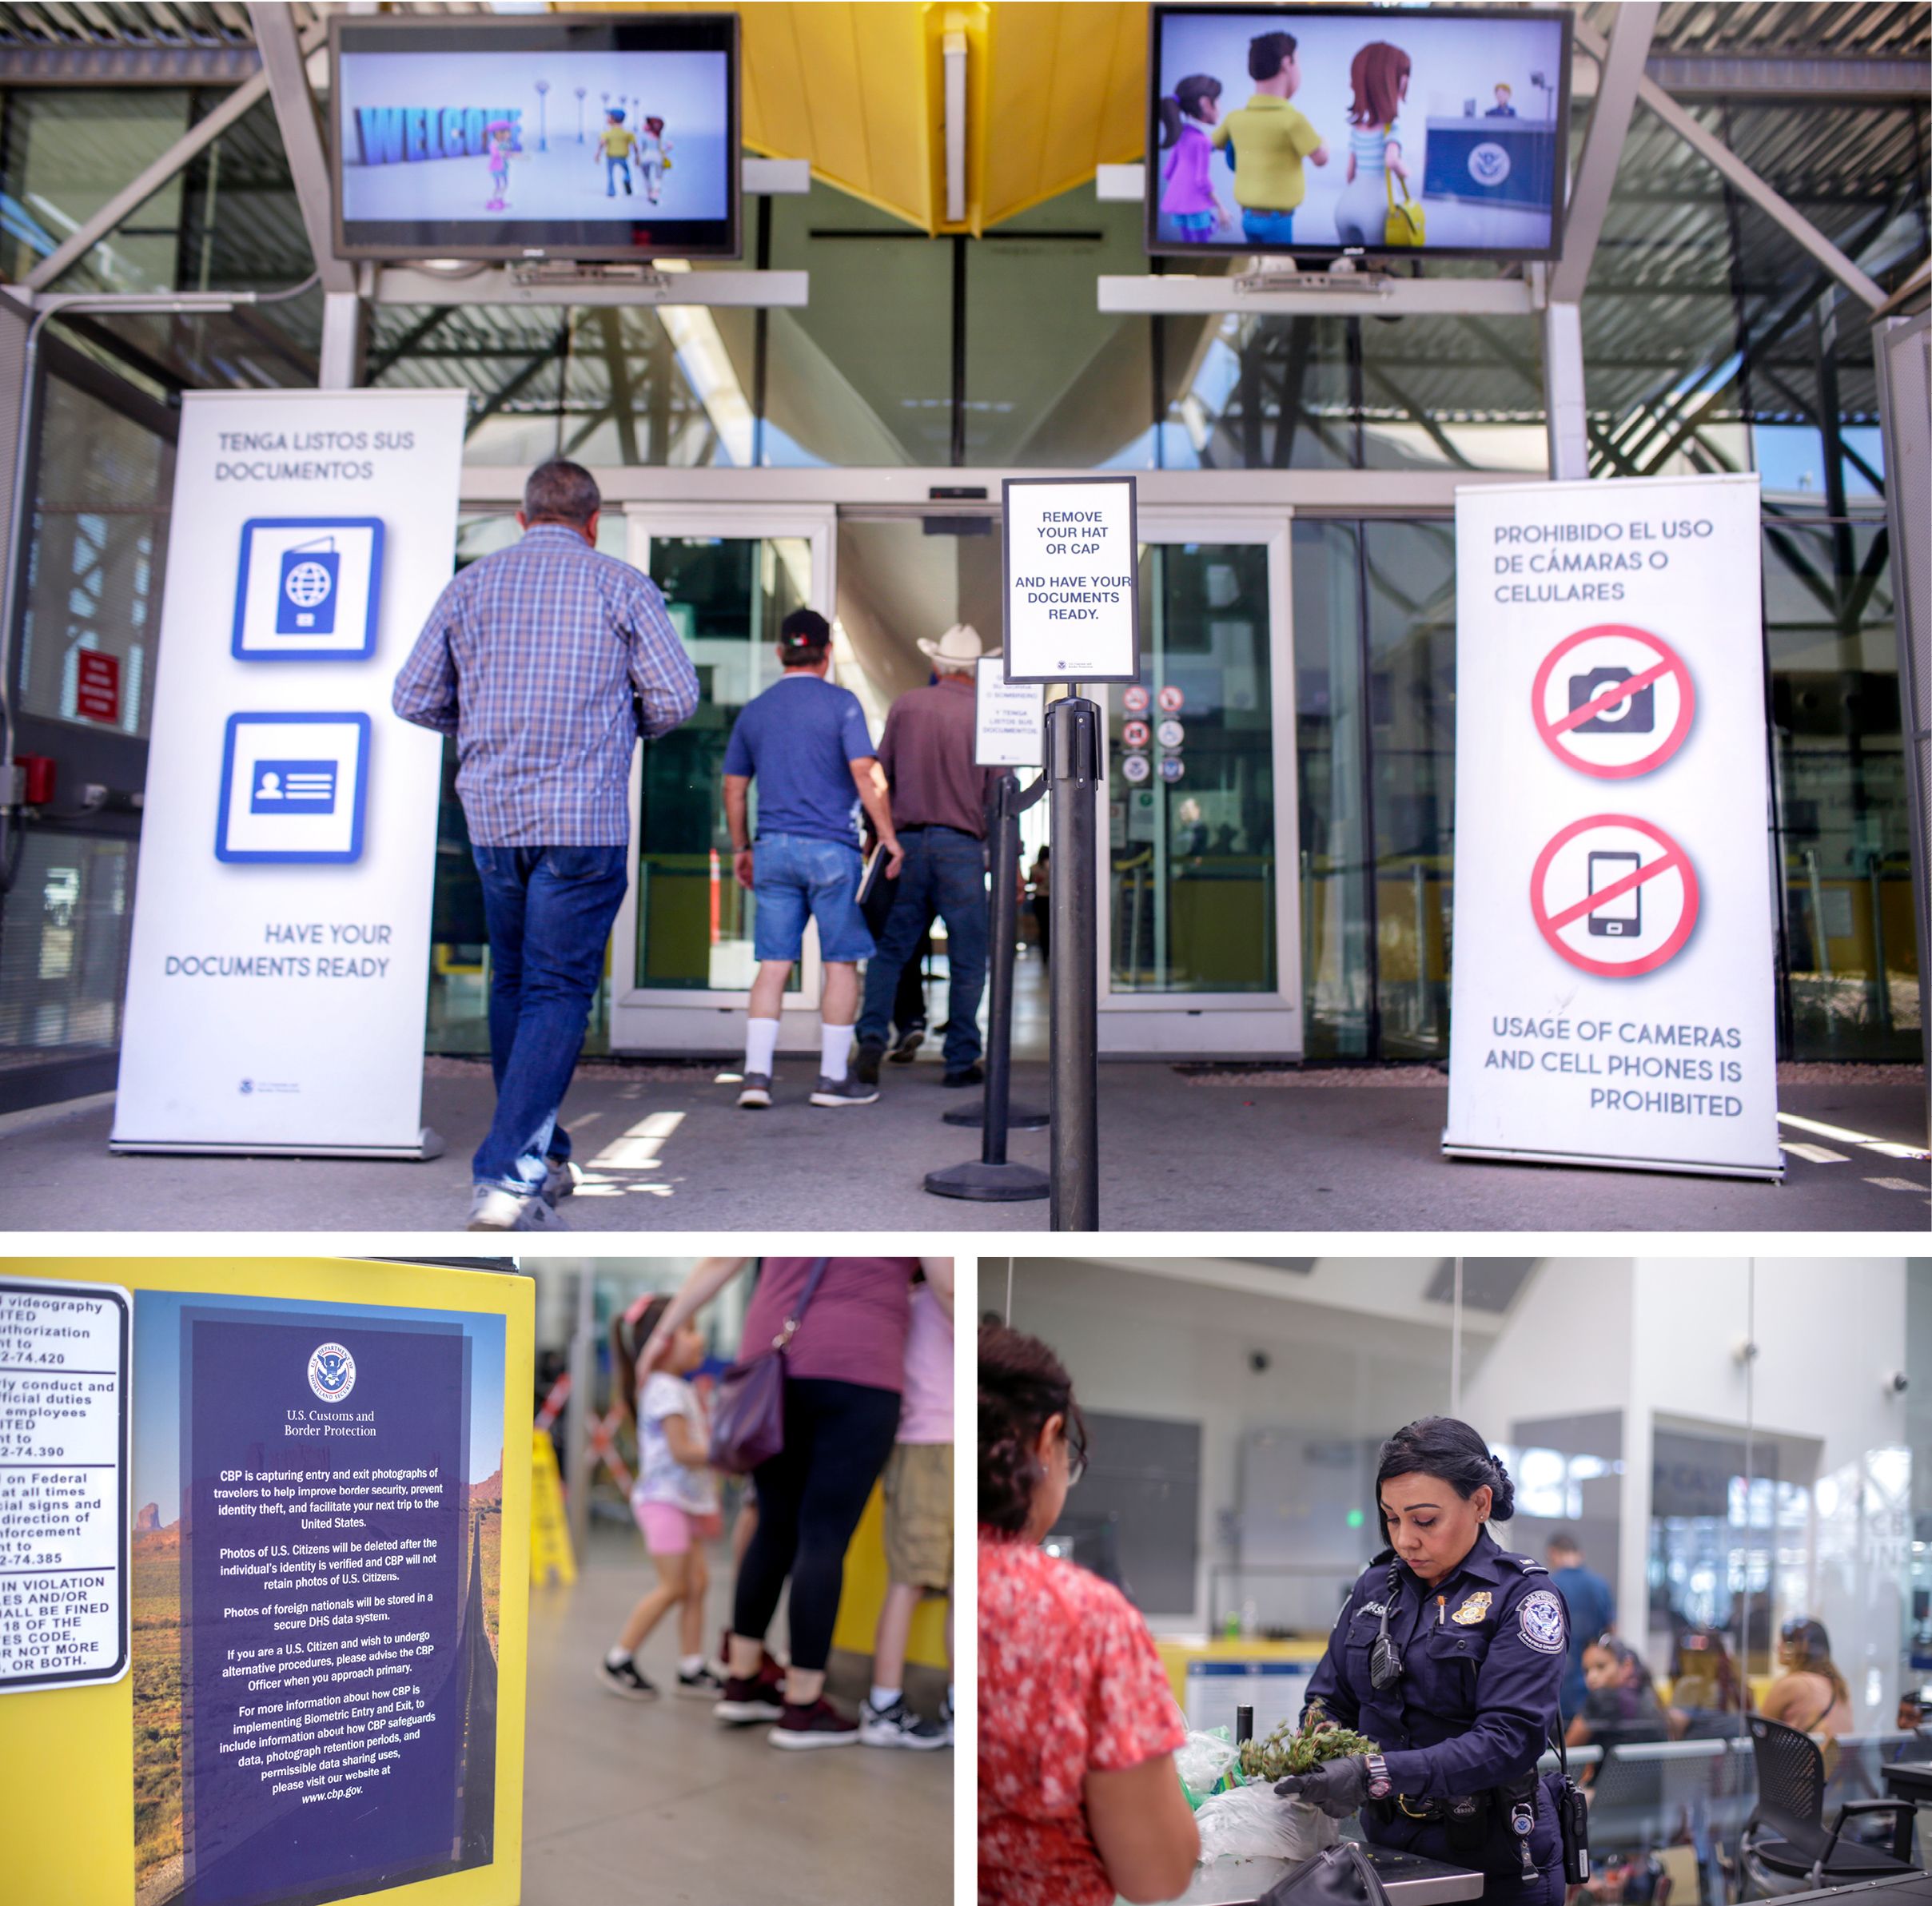 Top: A sign at the San Luis port-of-entry facility instructs travelers to take their hats off as they pass through customs into the United States. Hats can interfere with the new facial recognition technology the facility is using to confirm identities. Bottom Left: A sign explains how photos of border crossers are being used. Bottom right: A customs agent inspects a traveler’s bag. Image by Kathleen Flynn. United States, 2019. 